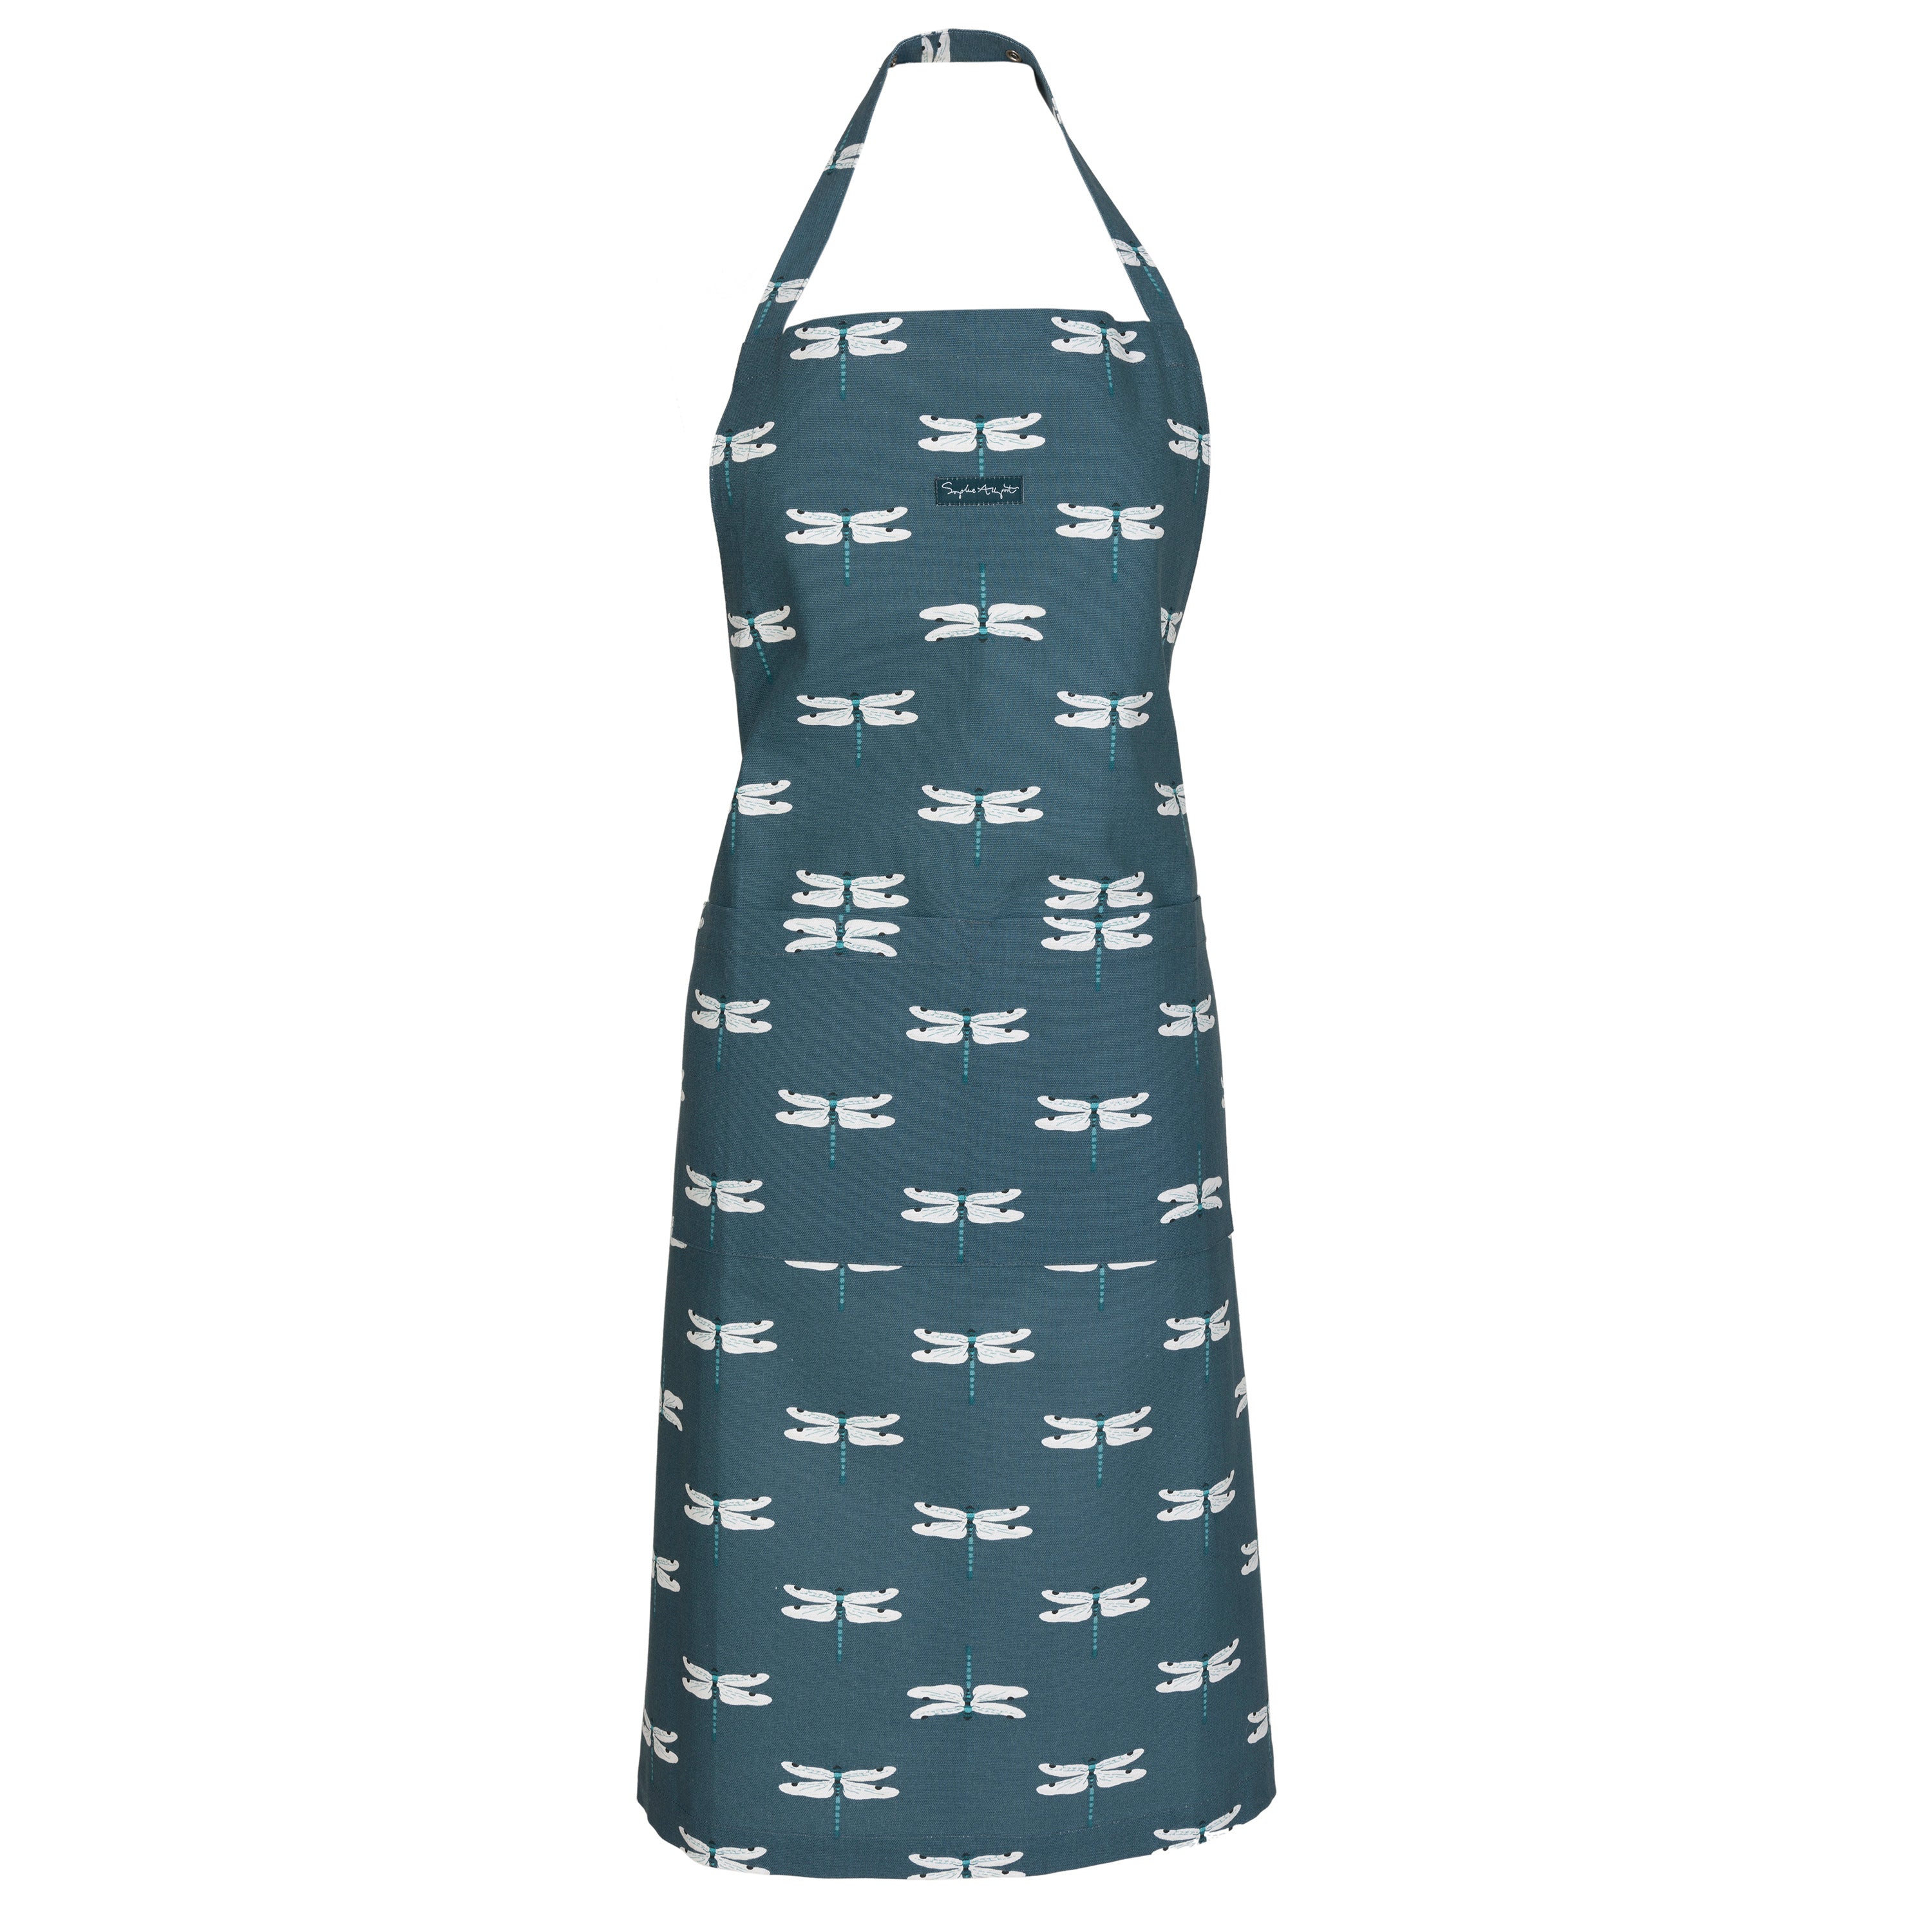 Adult Apron - Dragonfly